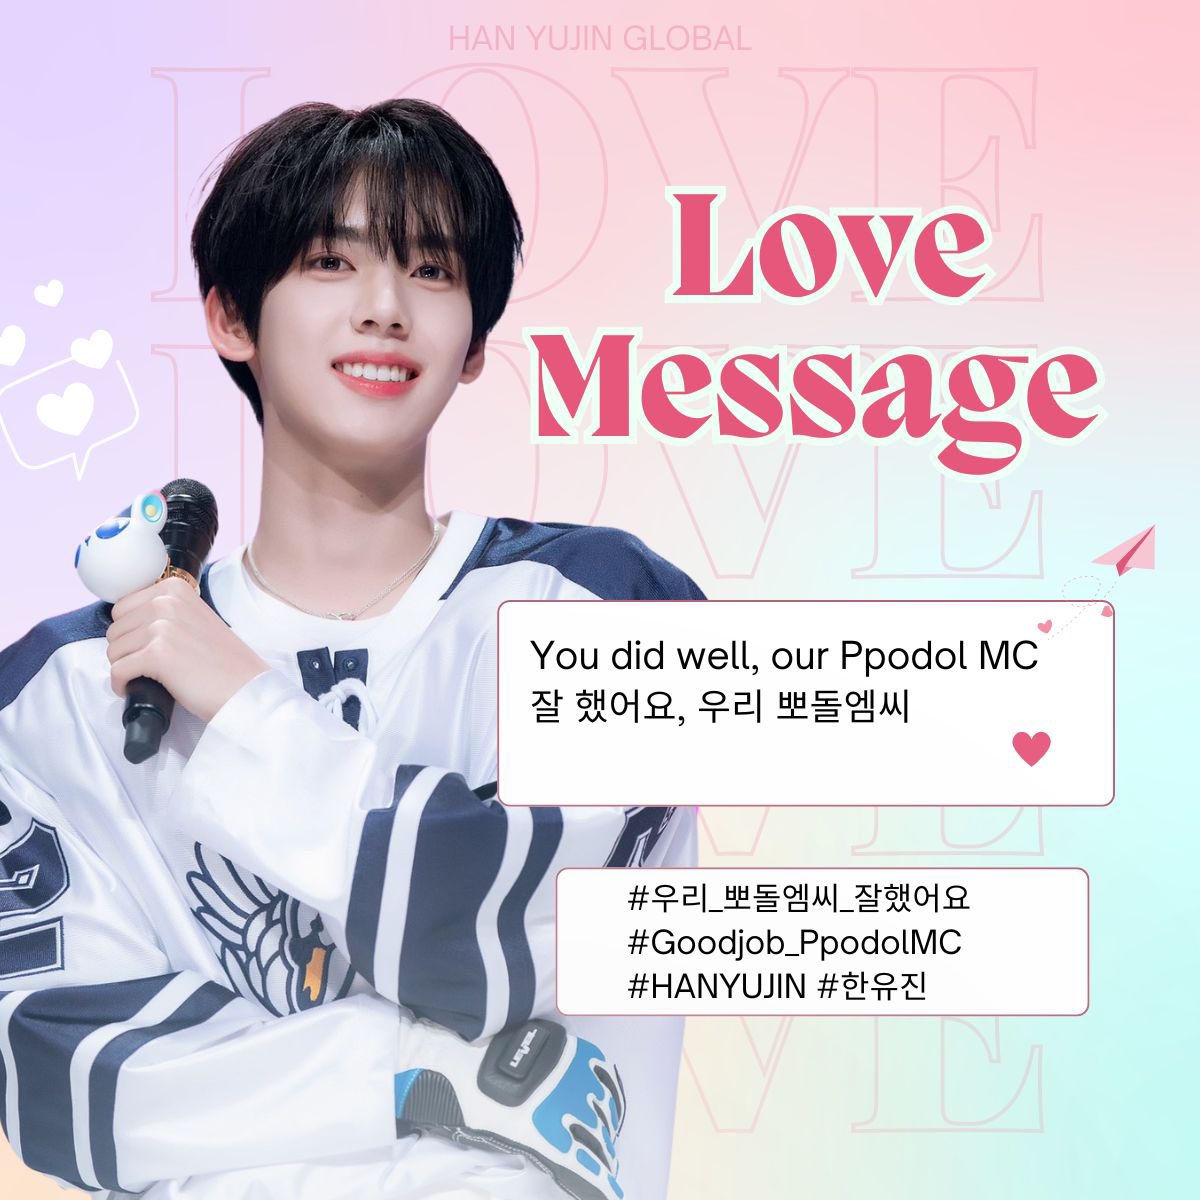 📢💌 — Love Message to our Ppodol MC #HANYUJIN Our Yujin did so well for today’s broadcast. He deserves all the praise! We encourage MULBOKDANz & ZEROSEs to send him encouraging messages PLUS CHAT. ➖Here’s a few phrases you can send him: • You did well, our Ppodol MC 잘